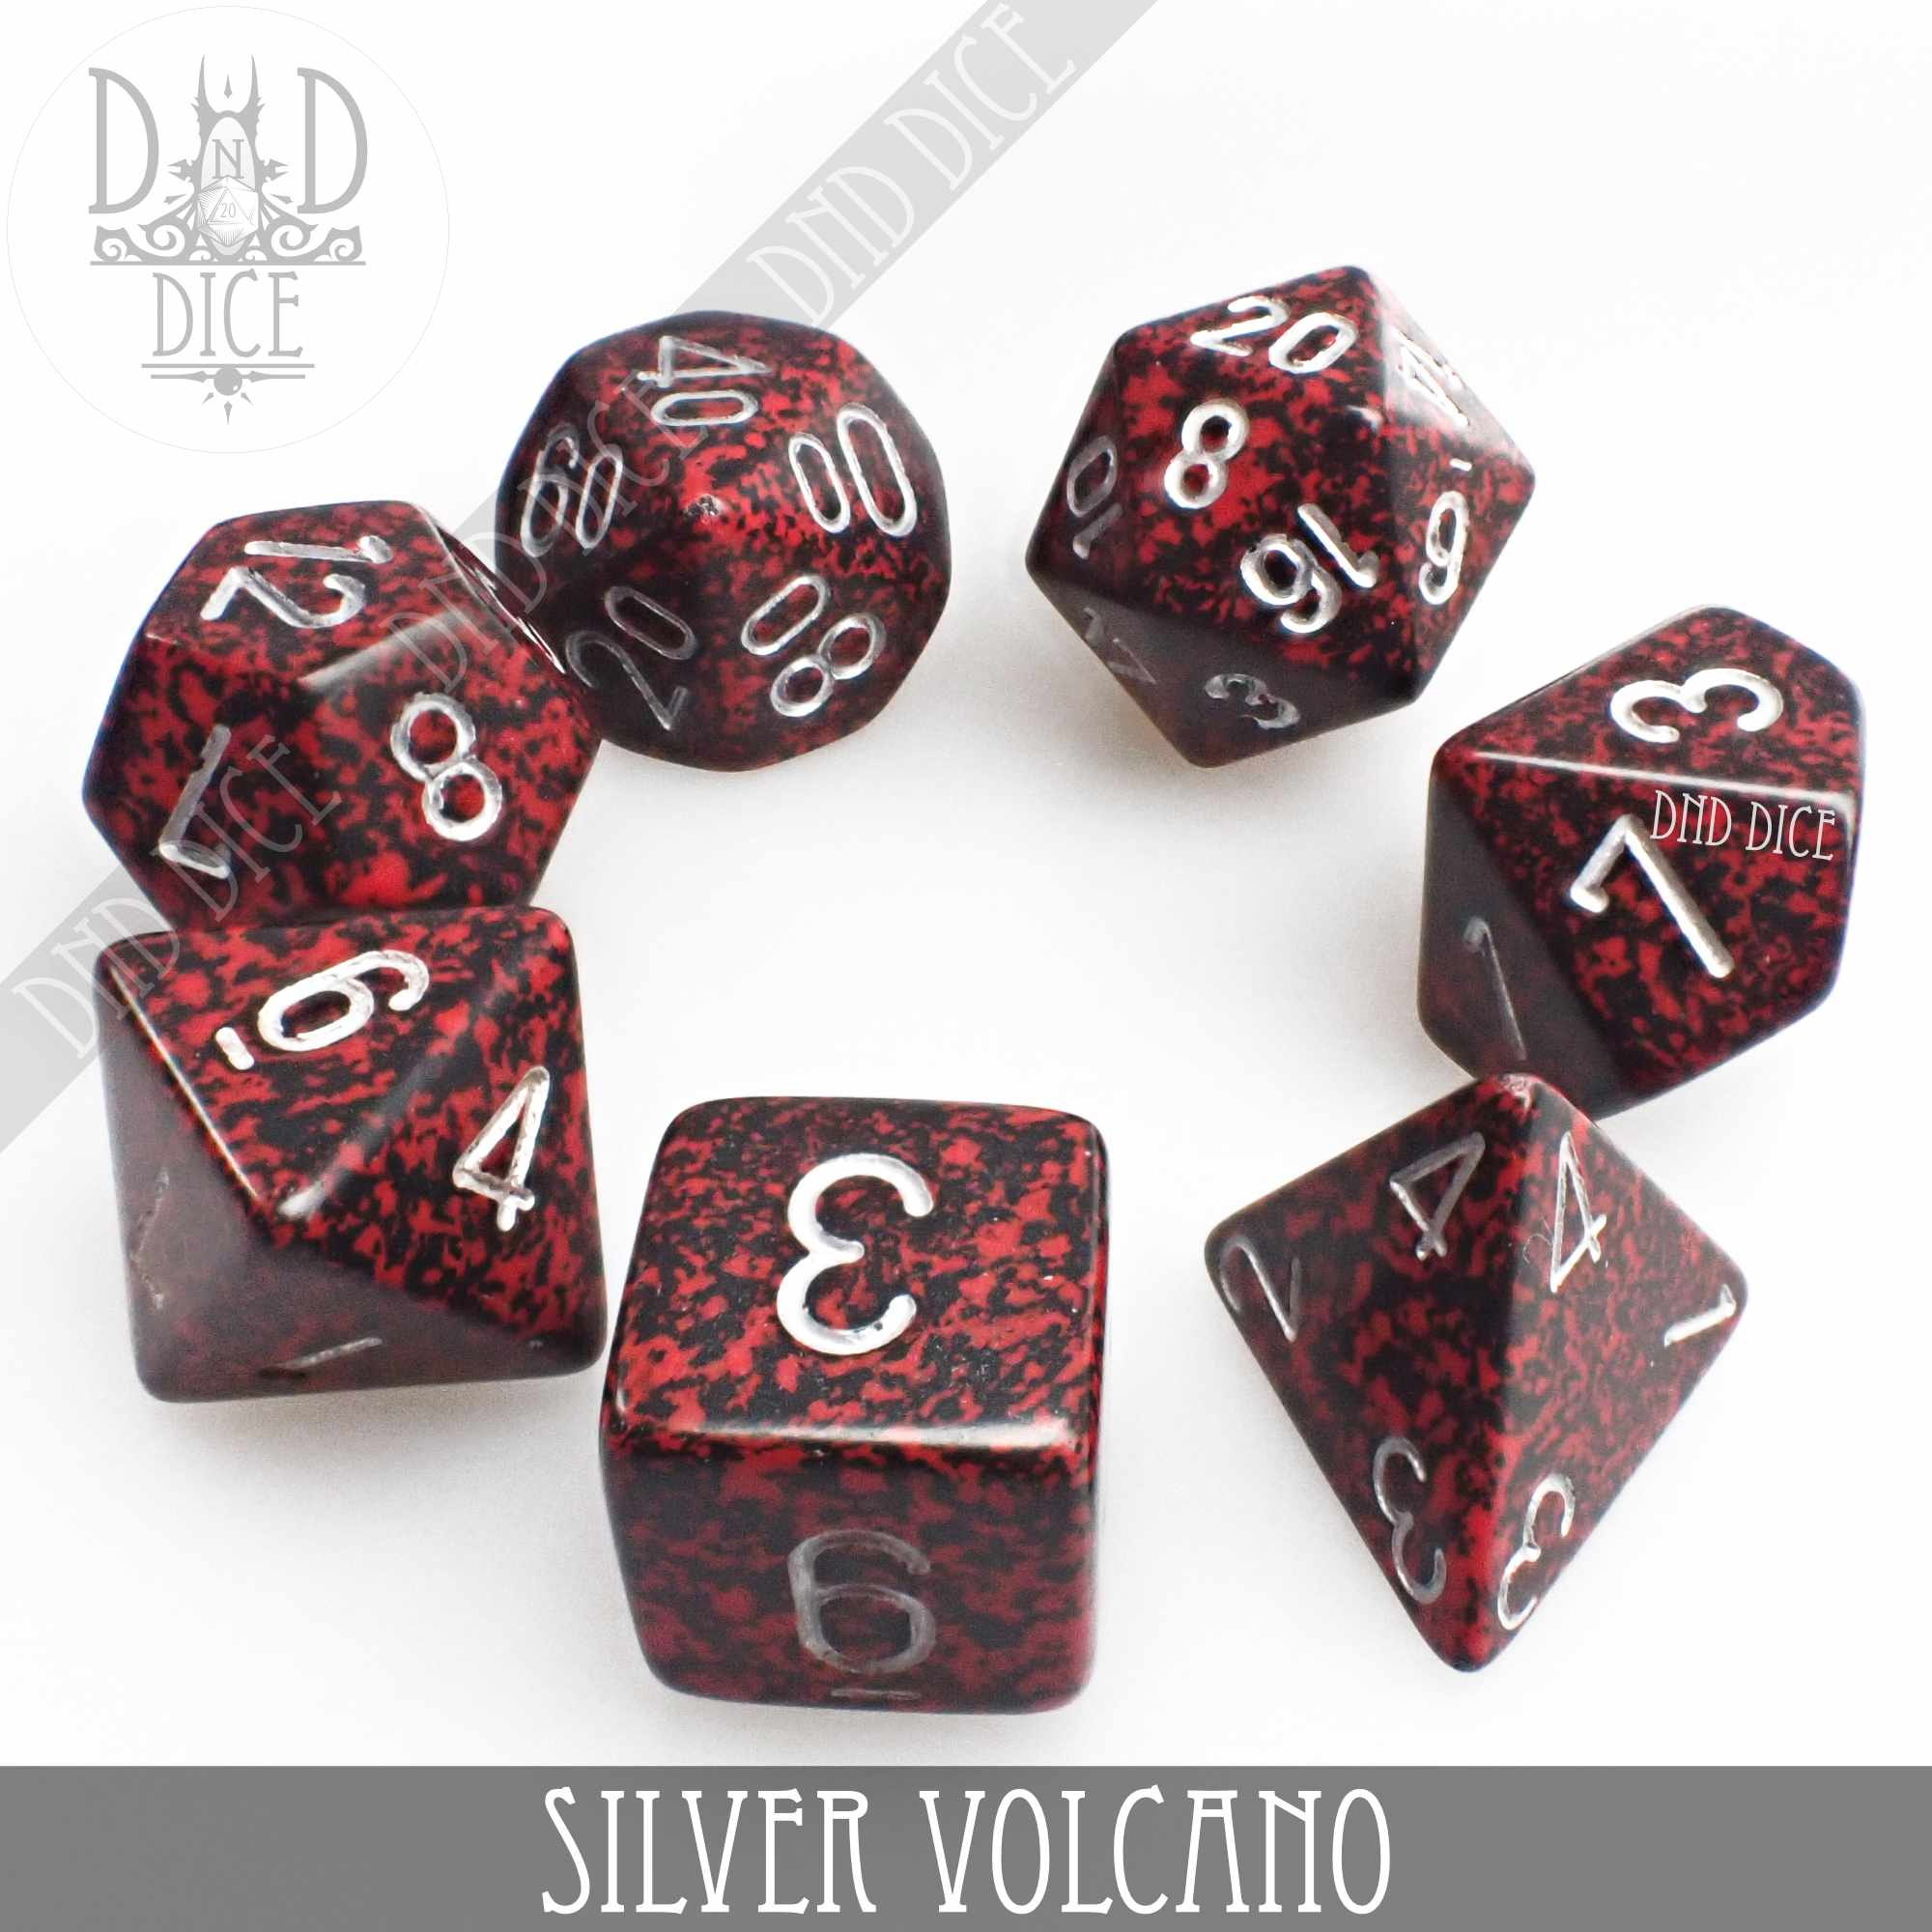 Silver Volcano Build Your Own Set